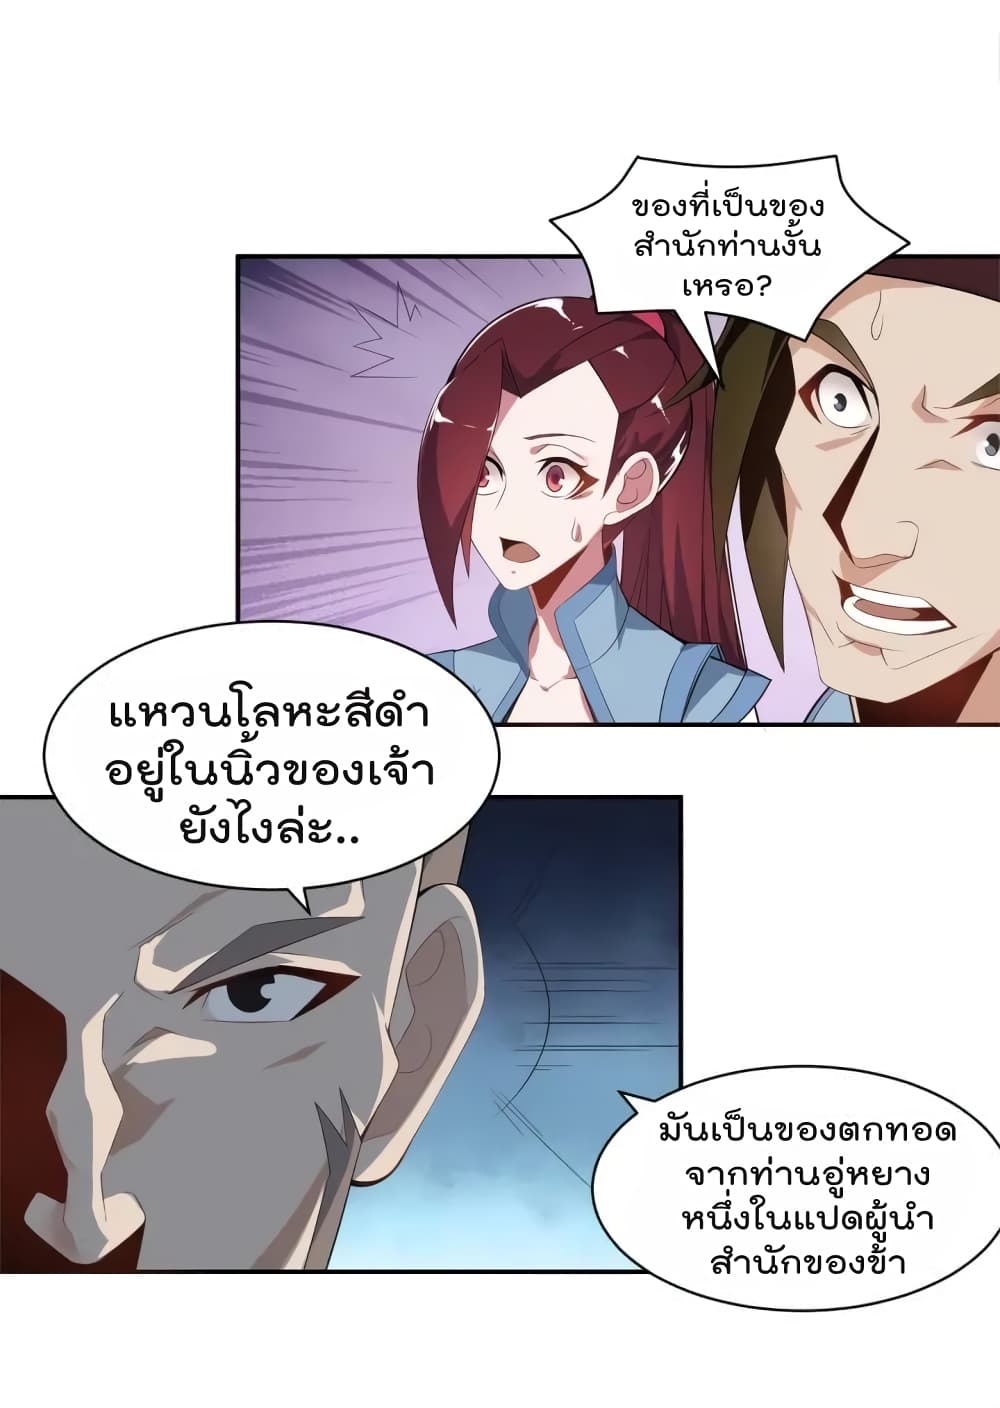 Swallow the Whole World เทพอสูรกลืนกินพิภพ 30-30